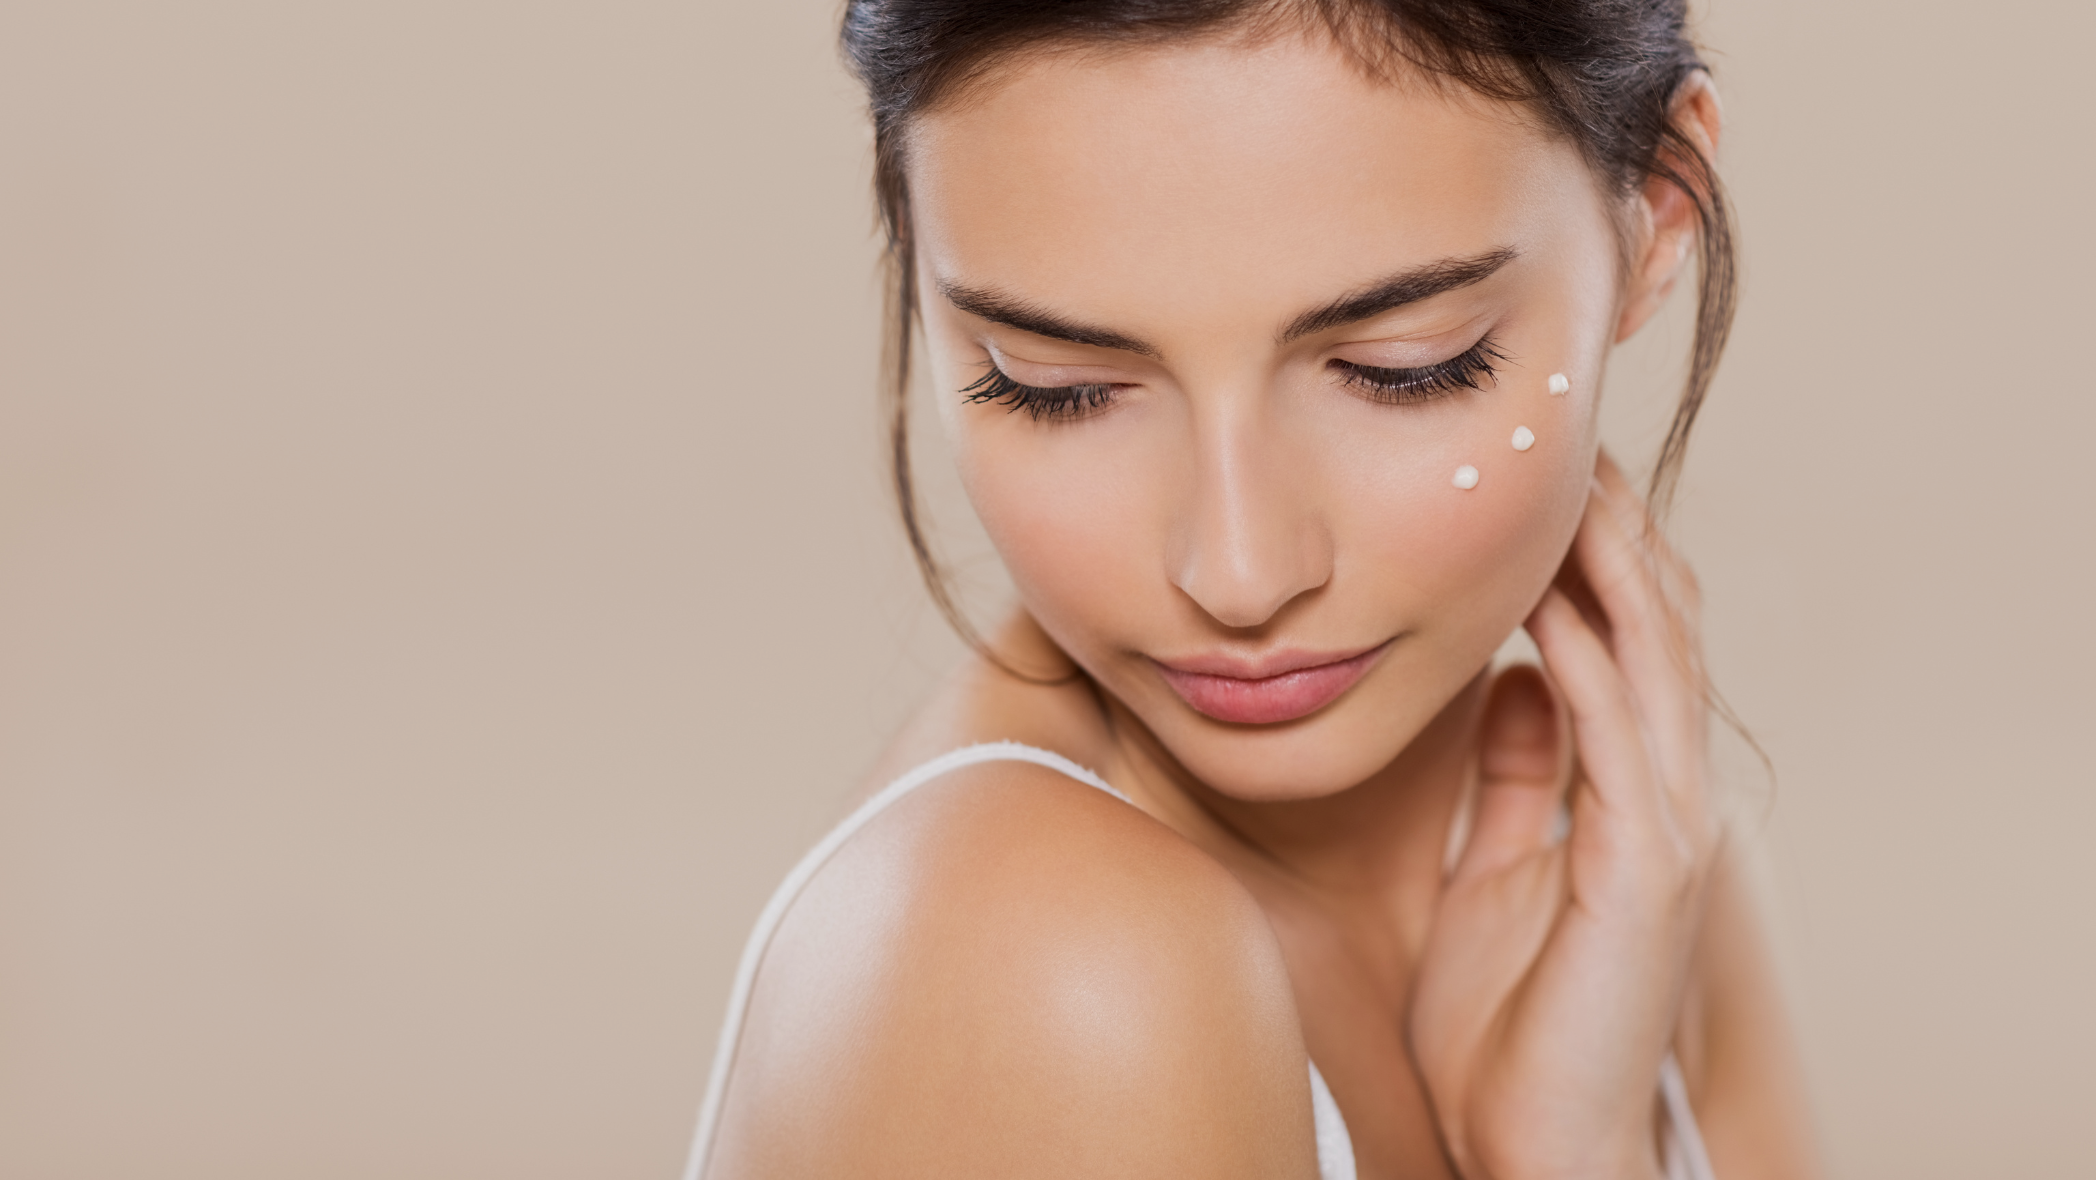 What to do with sensitive, irritated, and dull skin?